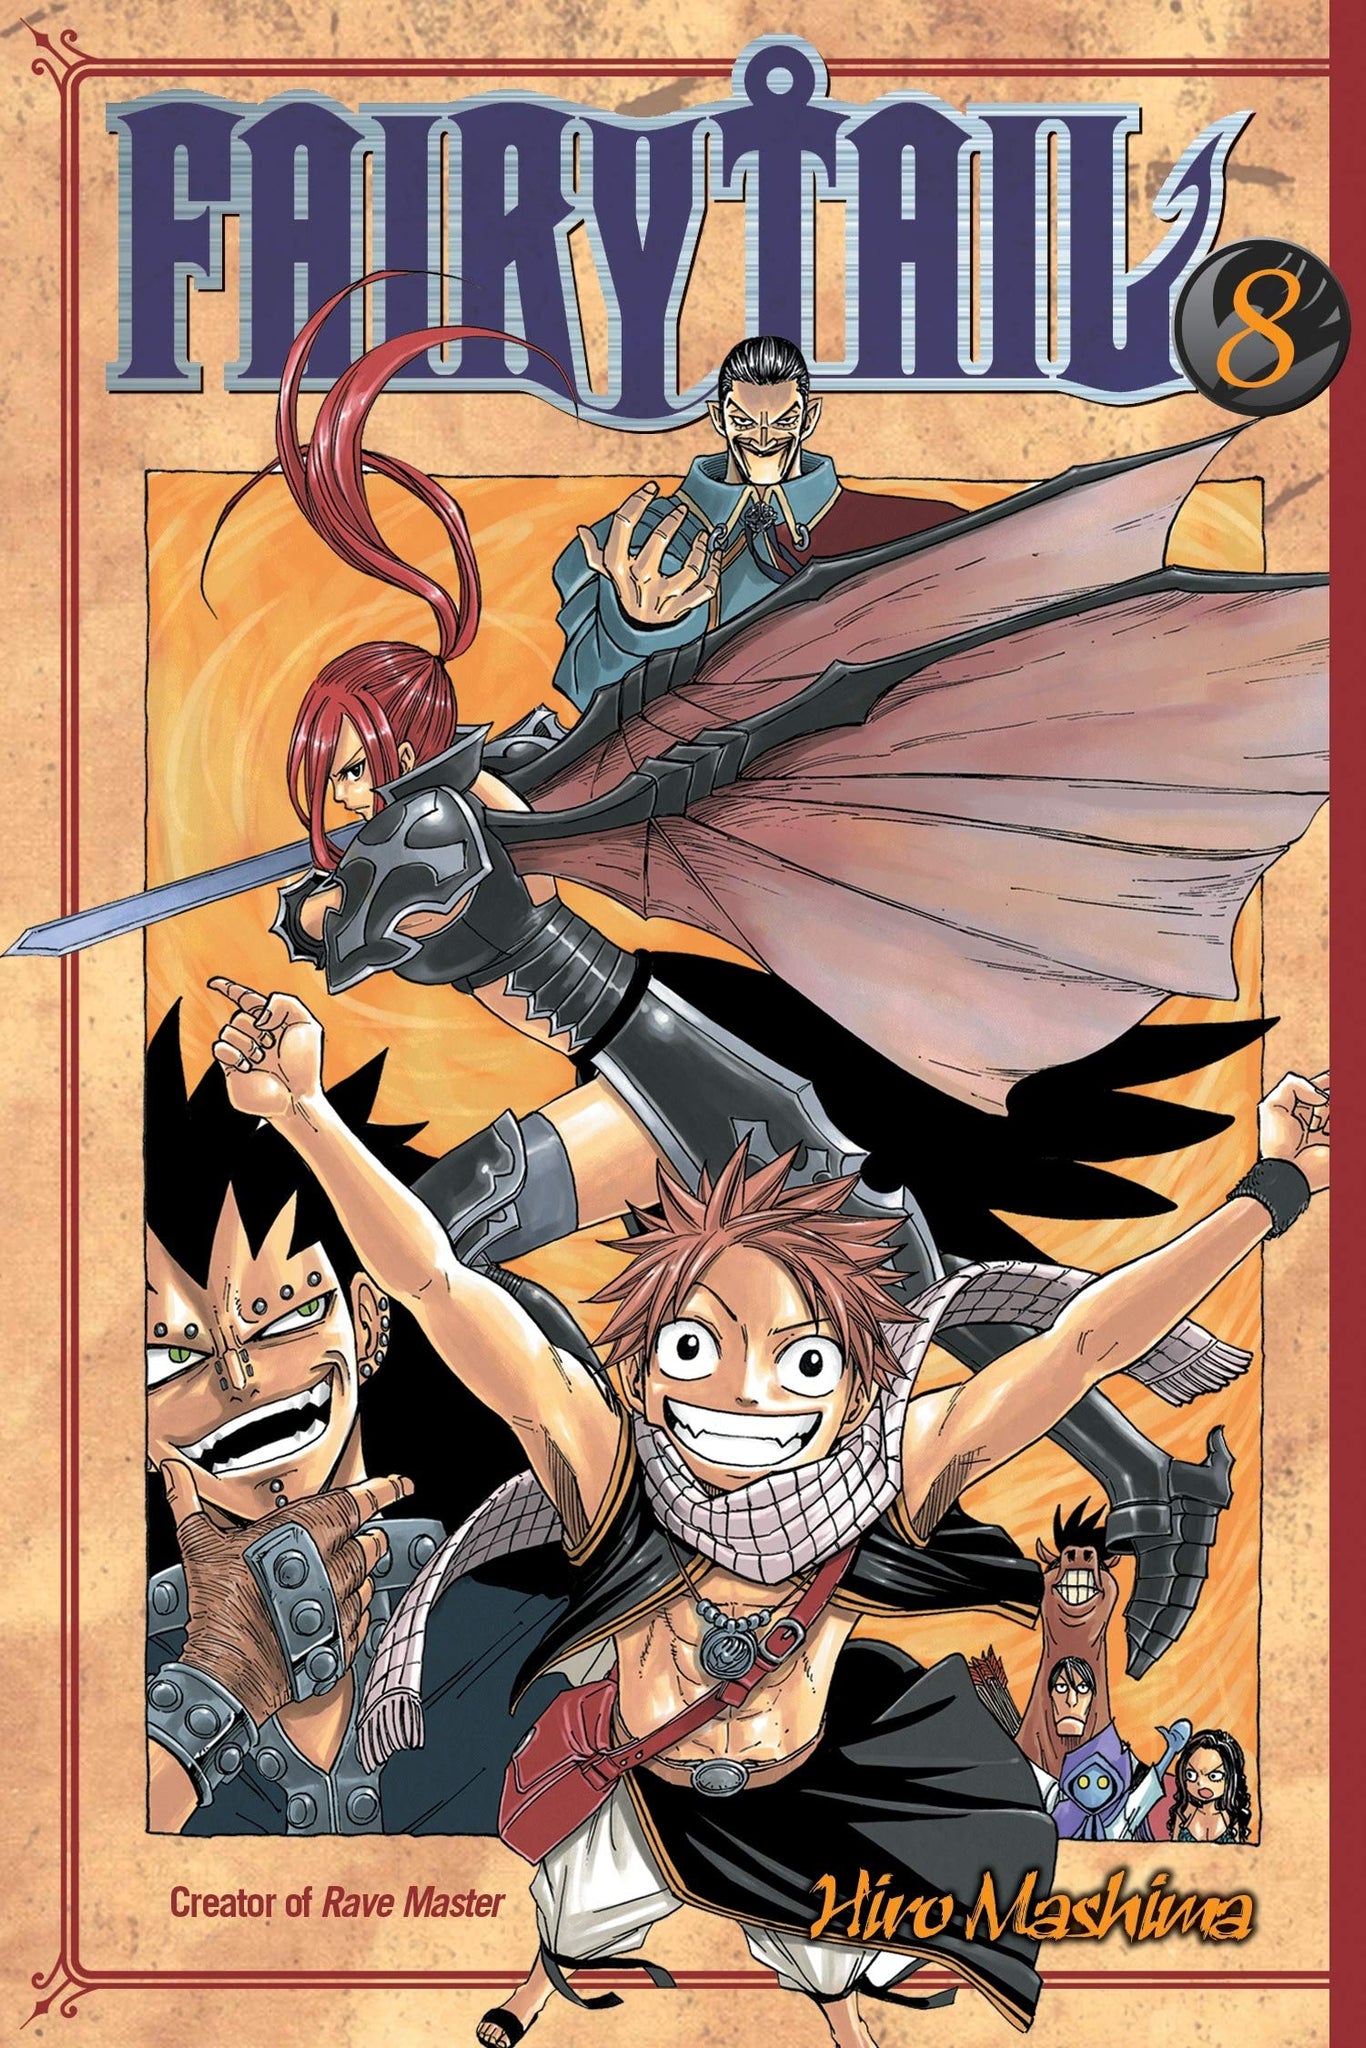 Fairy Tail #8 - Paperback